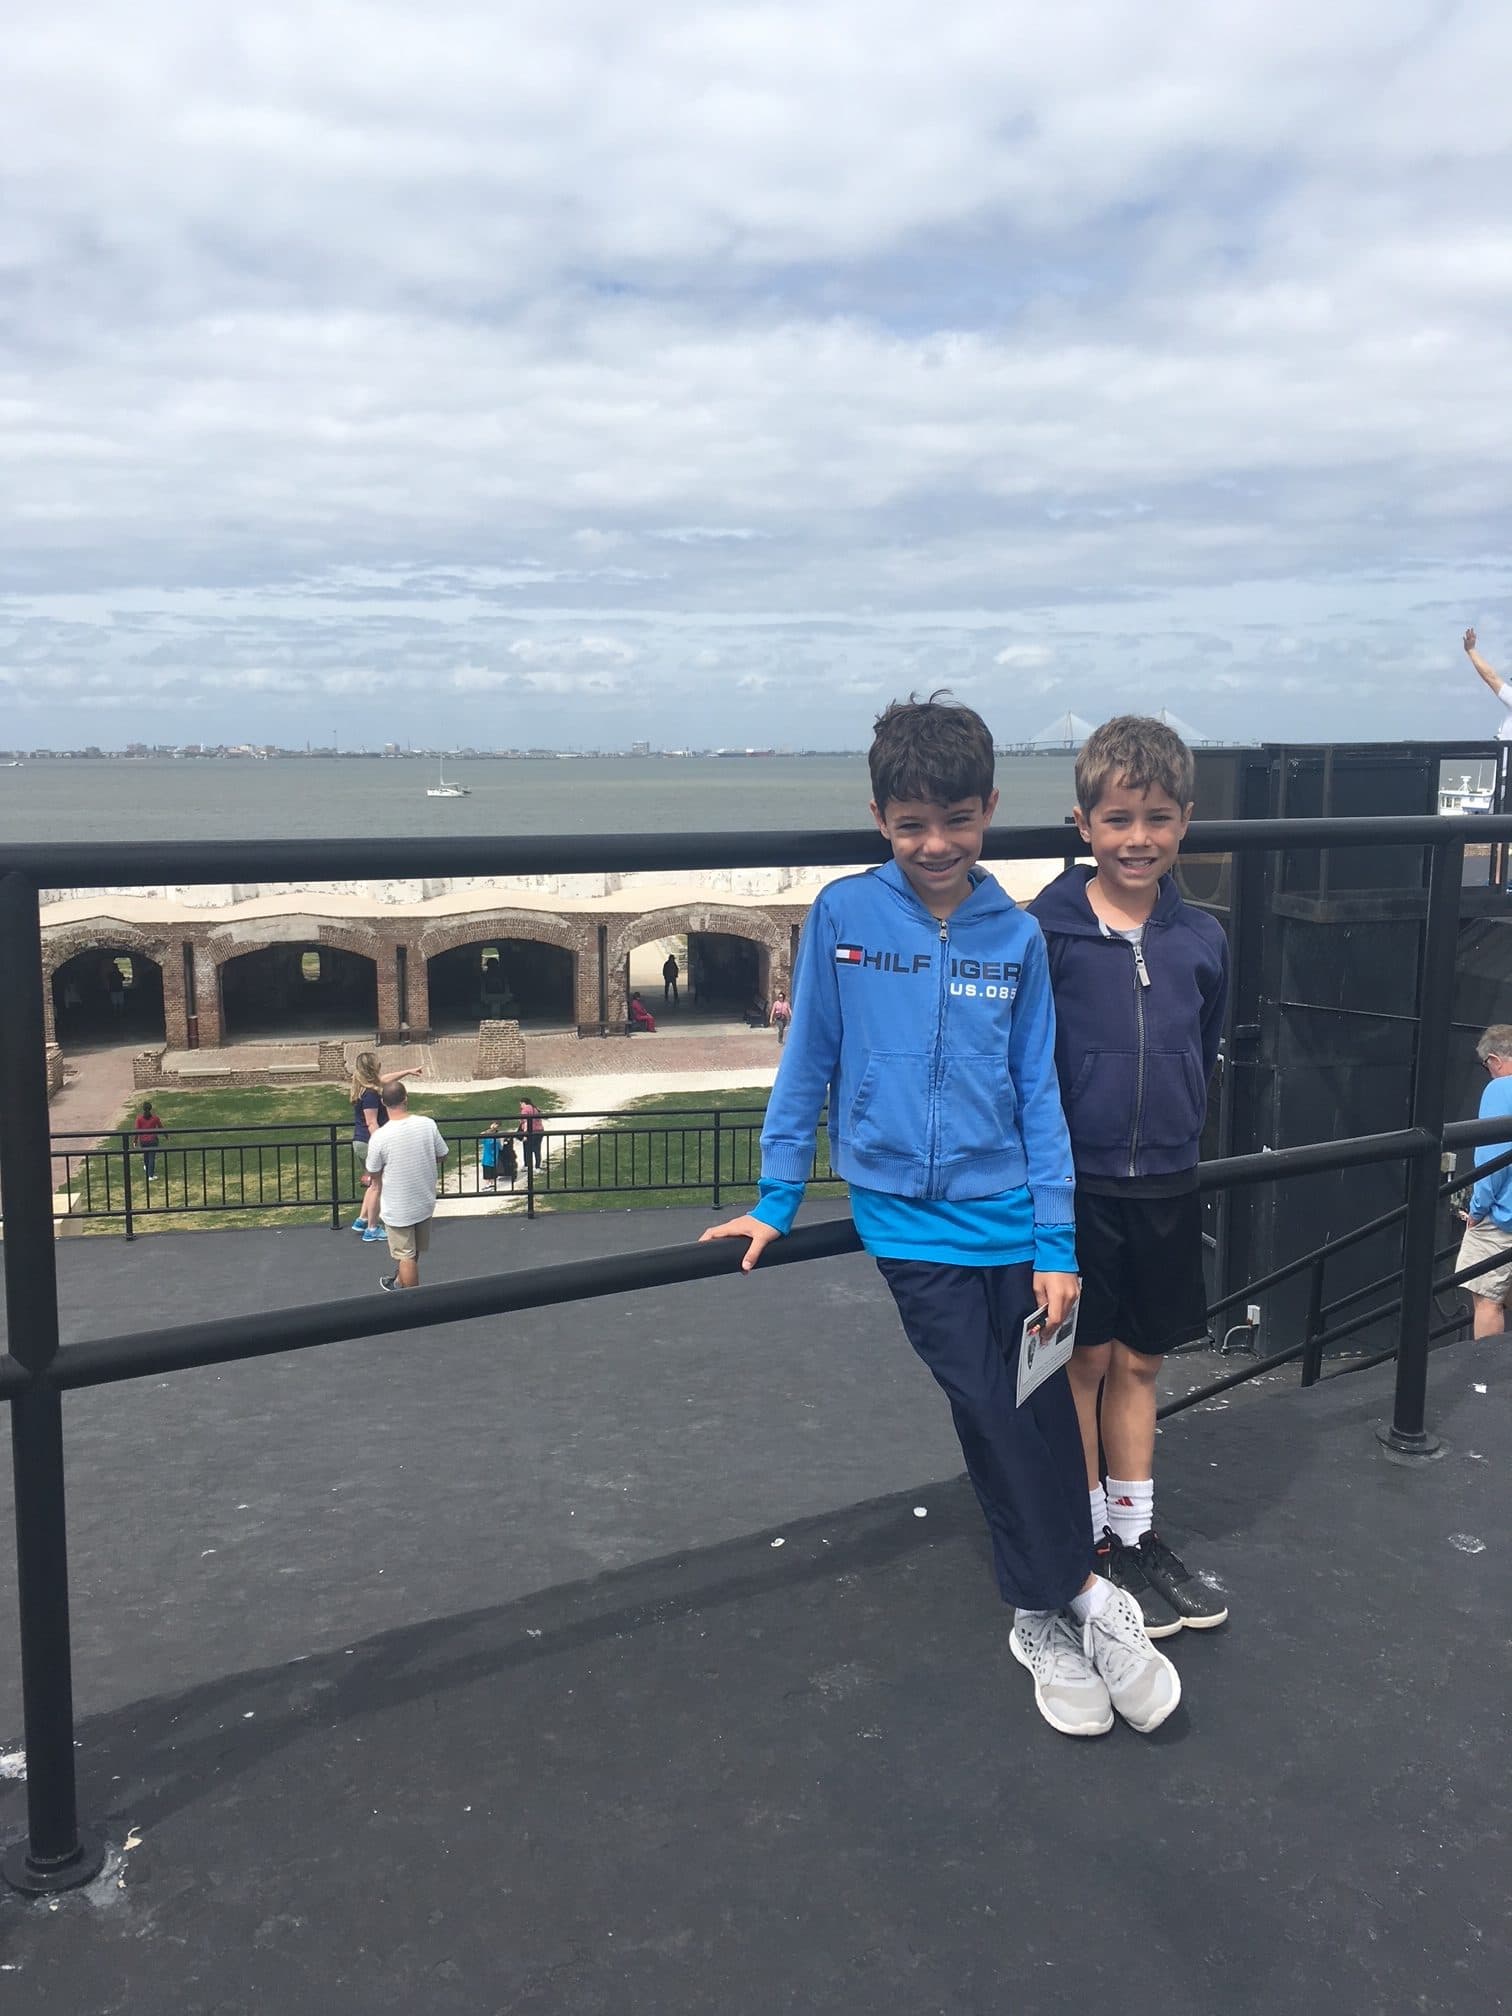 The boys loved exploring the island where Fort Sumter is located.